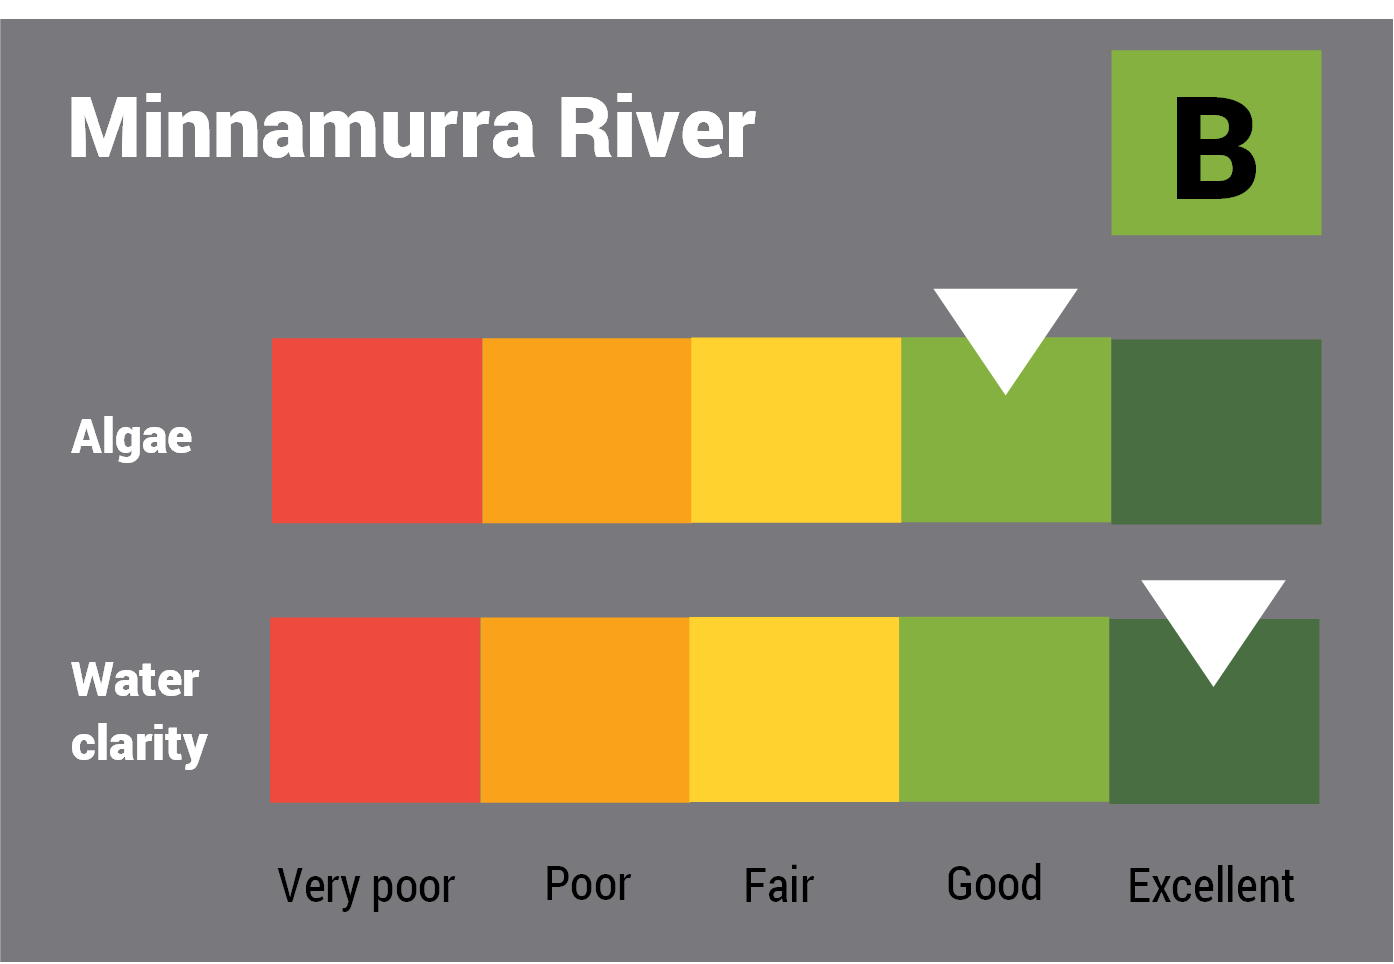 Minnamurra River water quality report card for algae and water clarity showing colour-coded ratings (red, orange, yellow, light green and dark green, which represent very poor, poor, fair, good and excellent, respectively). Algae is rated 'poor' and water clarity is rated 'good' giving an overall rating of 'fair' or 'C'.